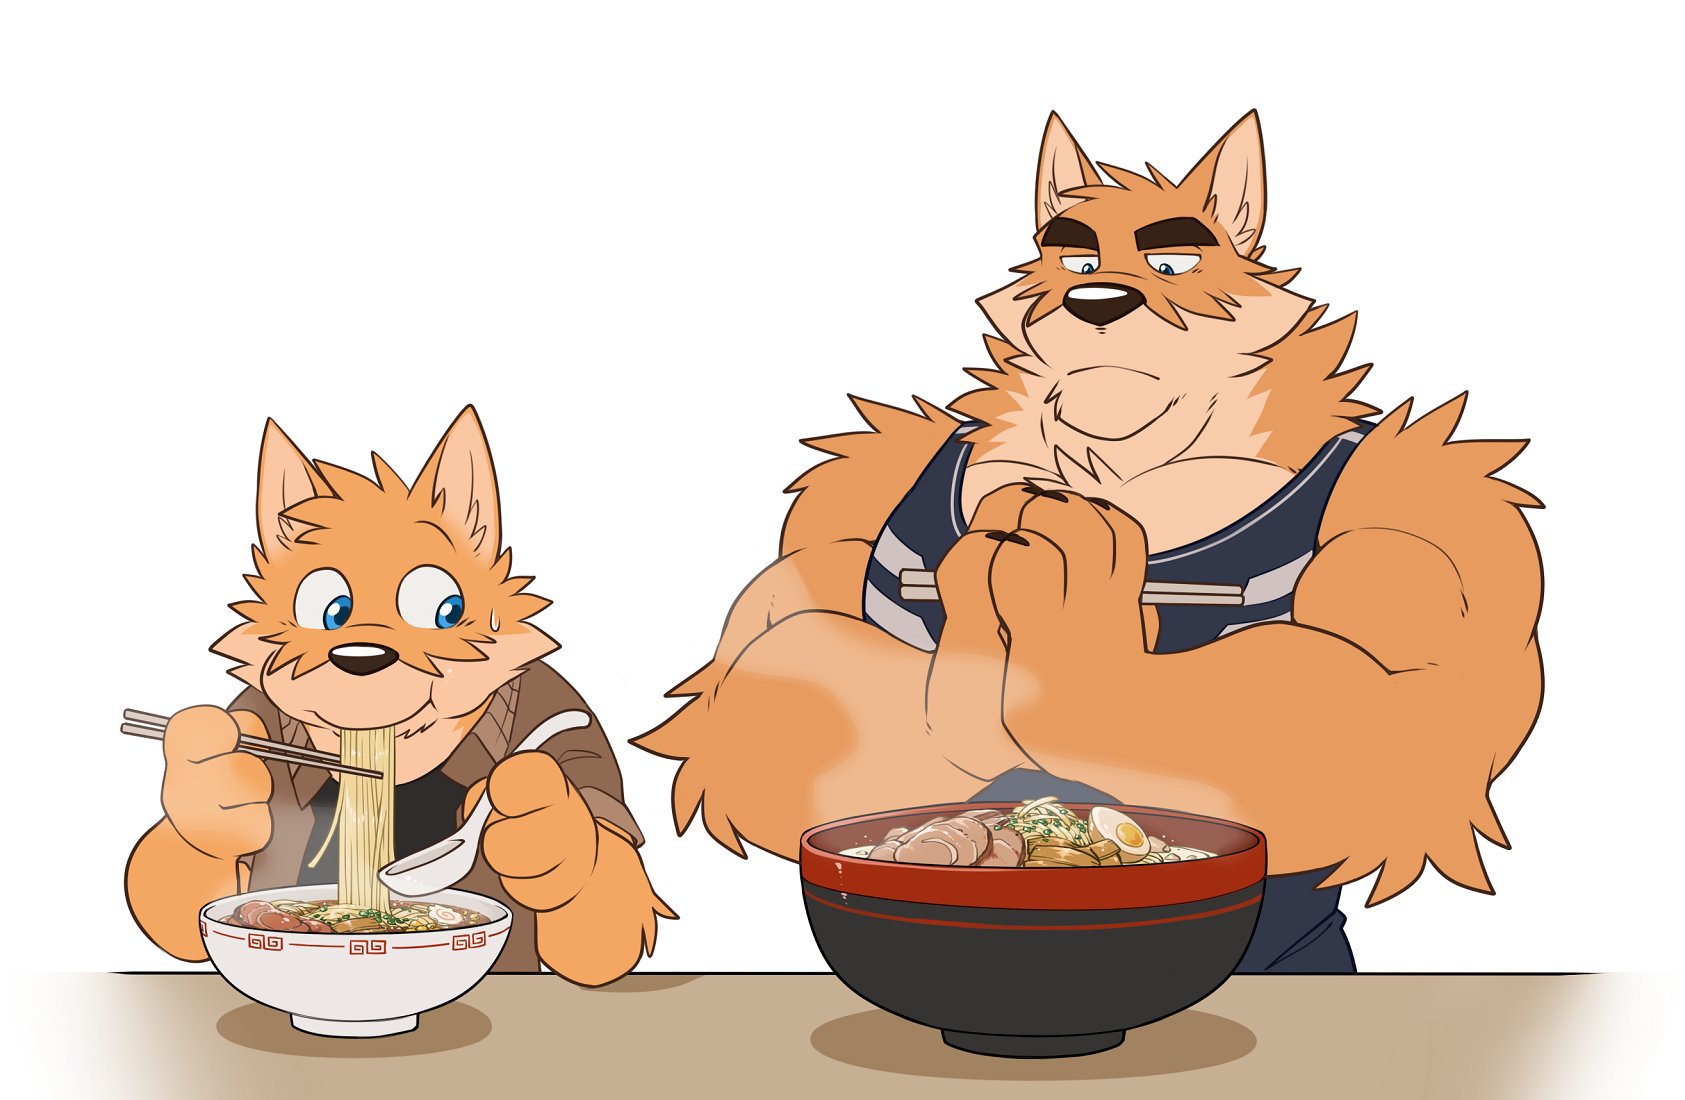 “[Doodle] I bet Otake can eat more then that...🍜” .